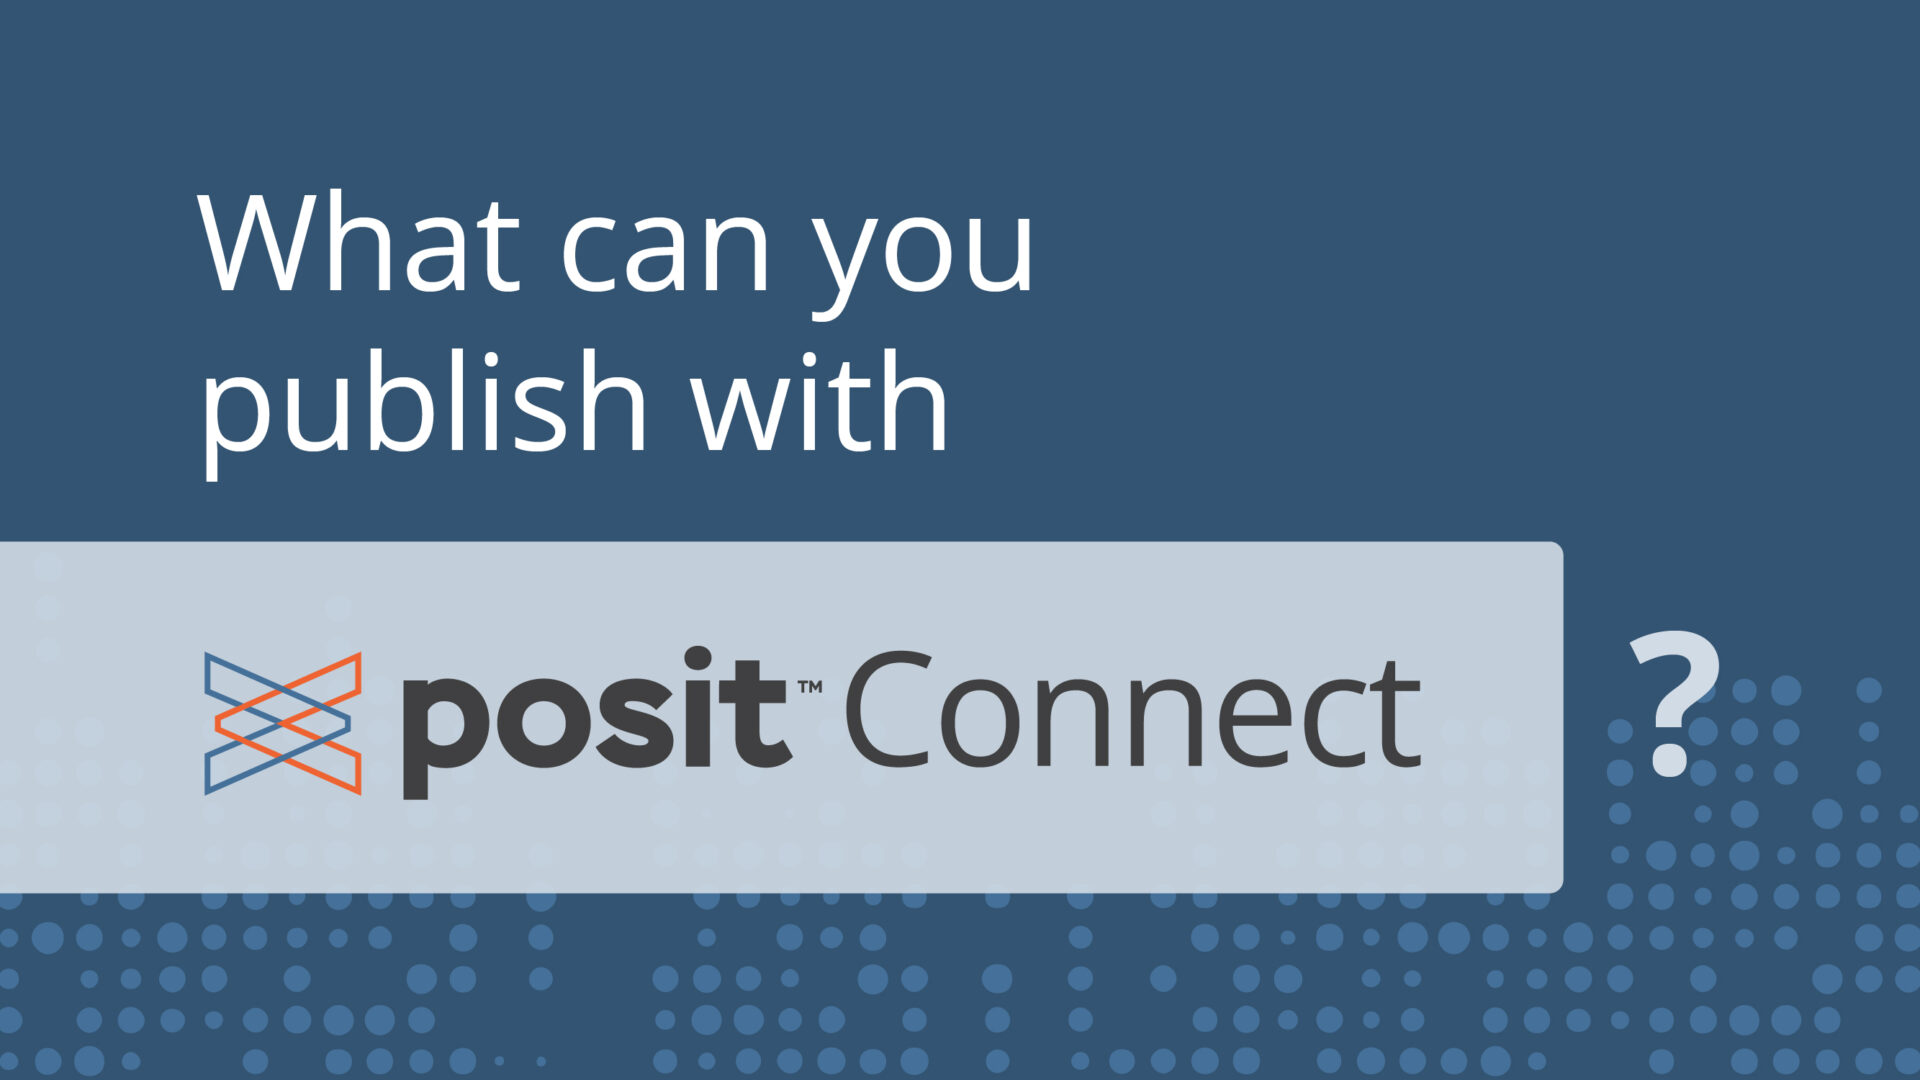 Text: What can you publish with Posit Connect?